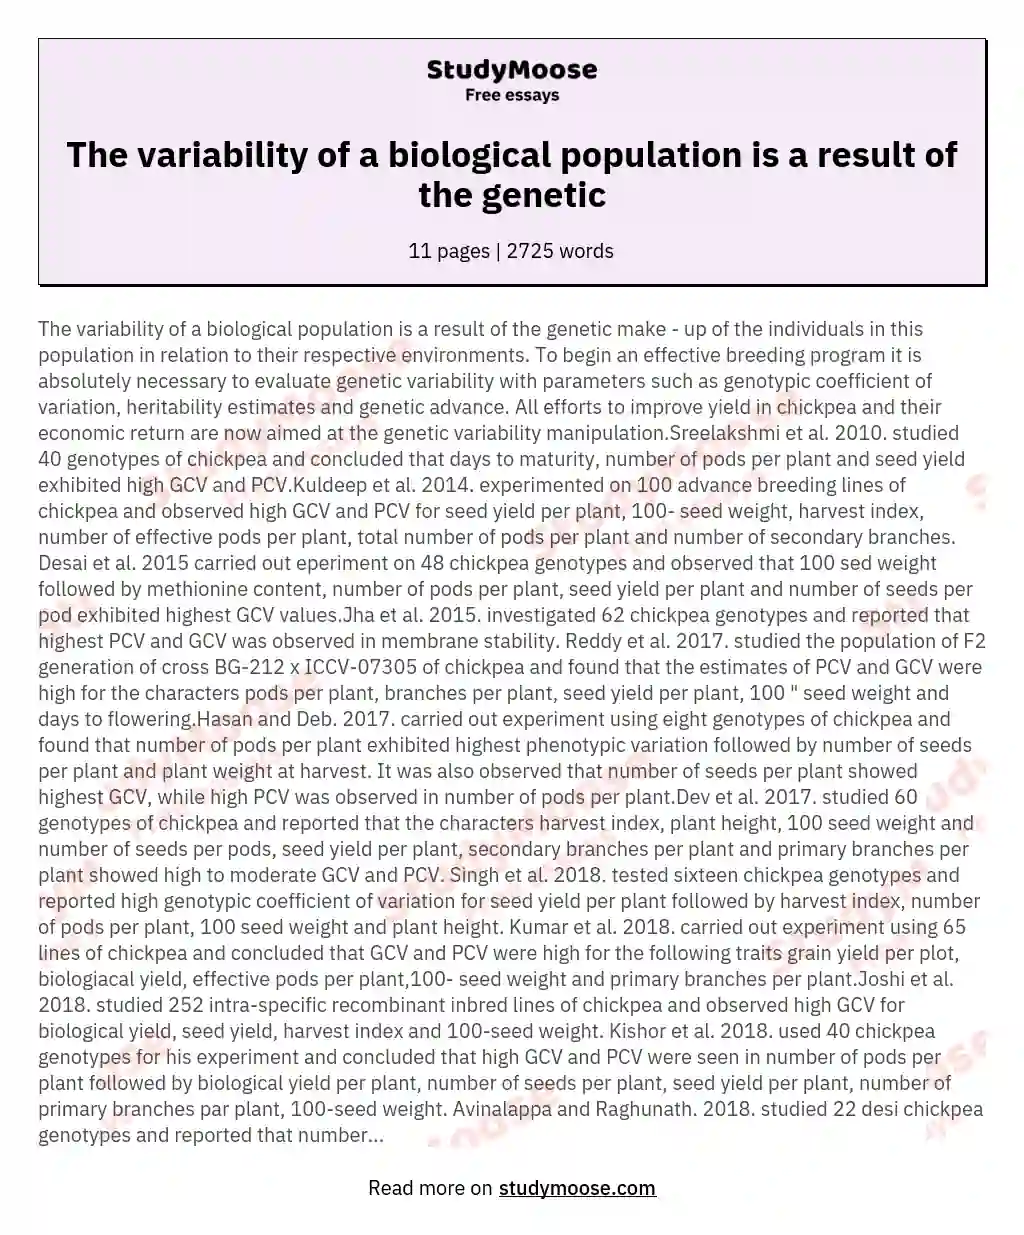 The variability of a biological population is a result of the genetic essay